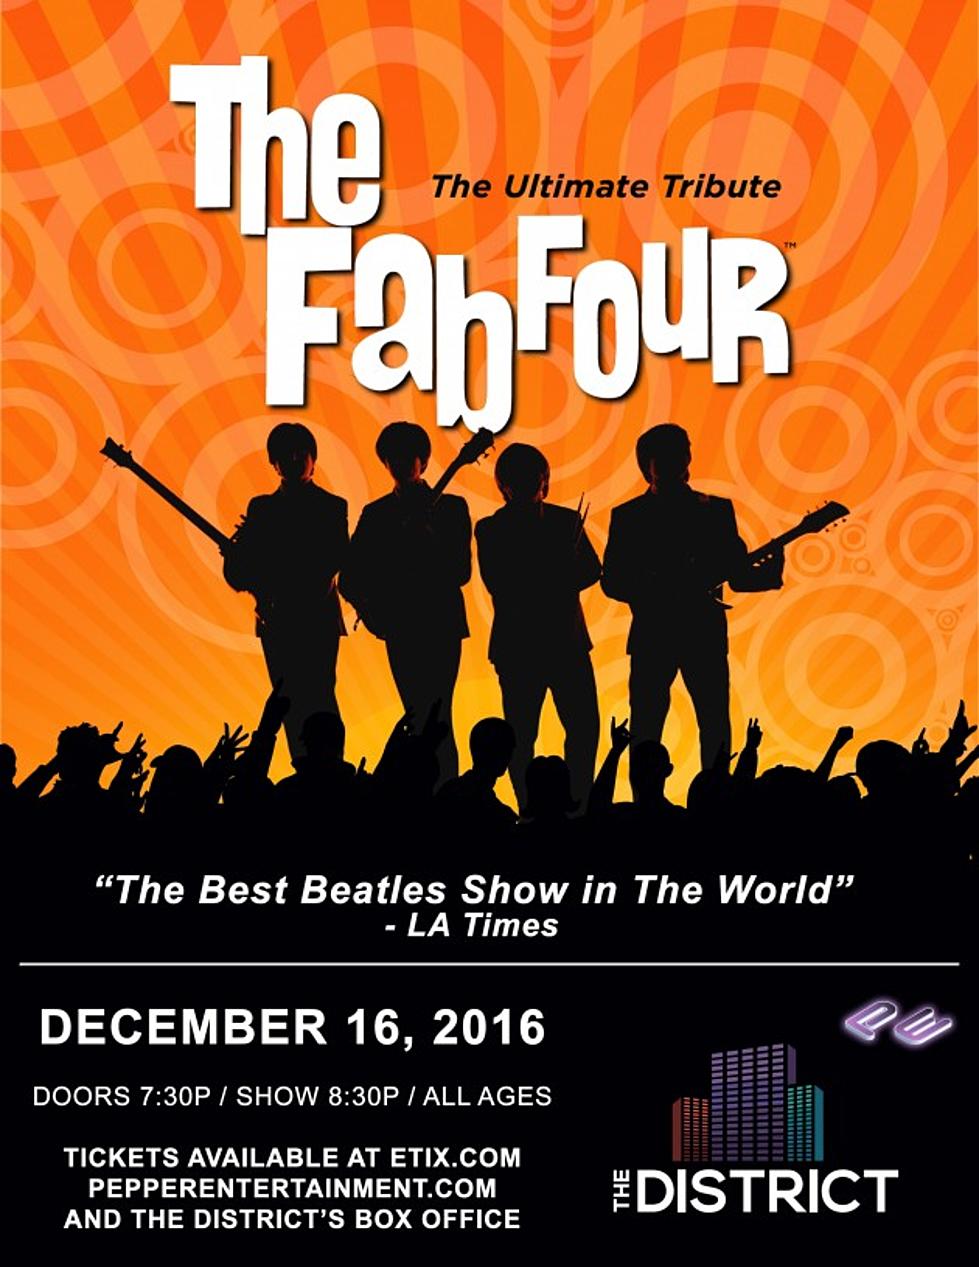 The Fab Four &#8211; the Ultimate Beatles Tribute is Coming to Sioux Falls